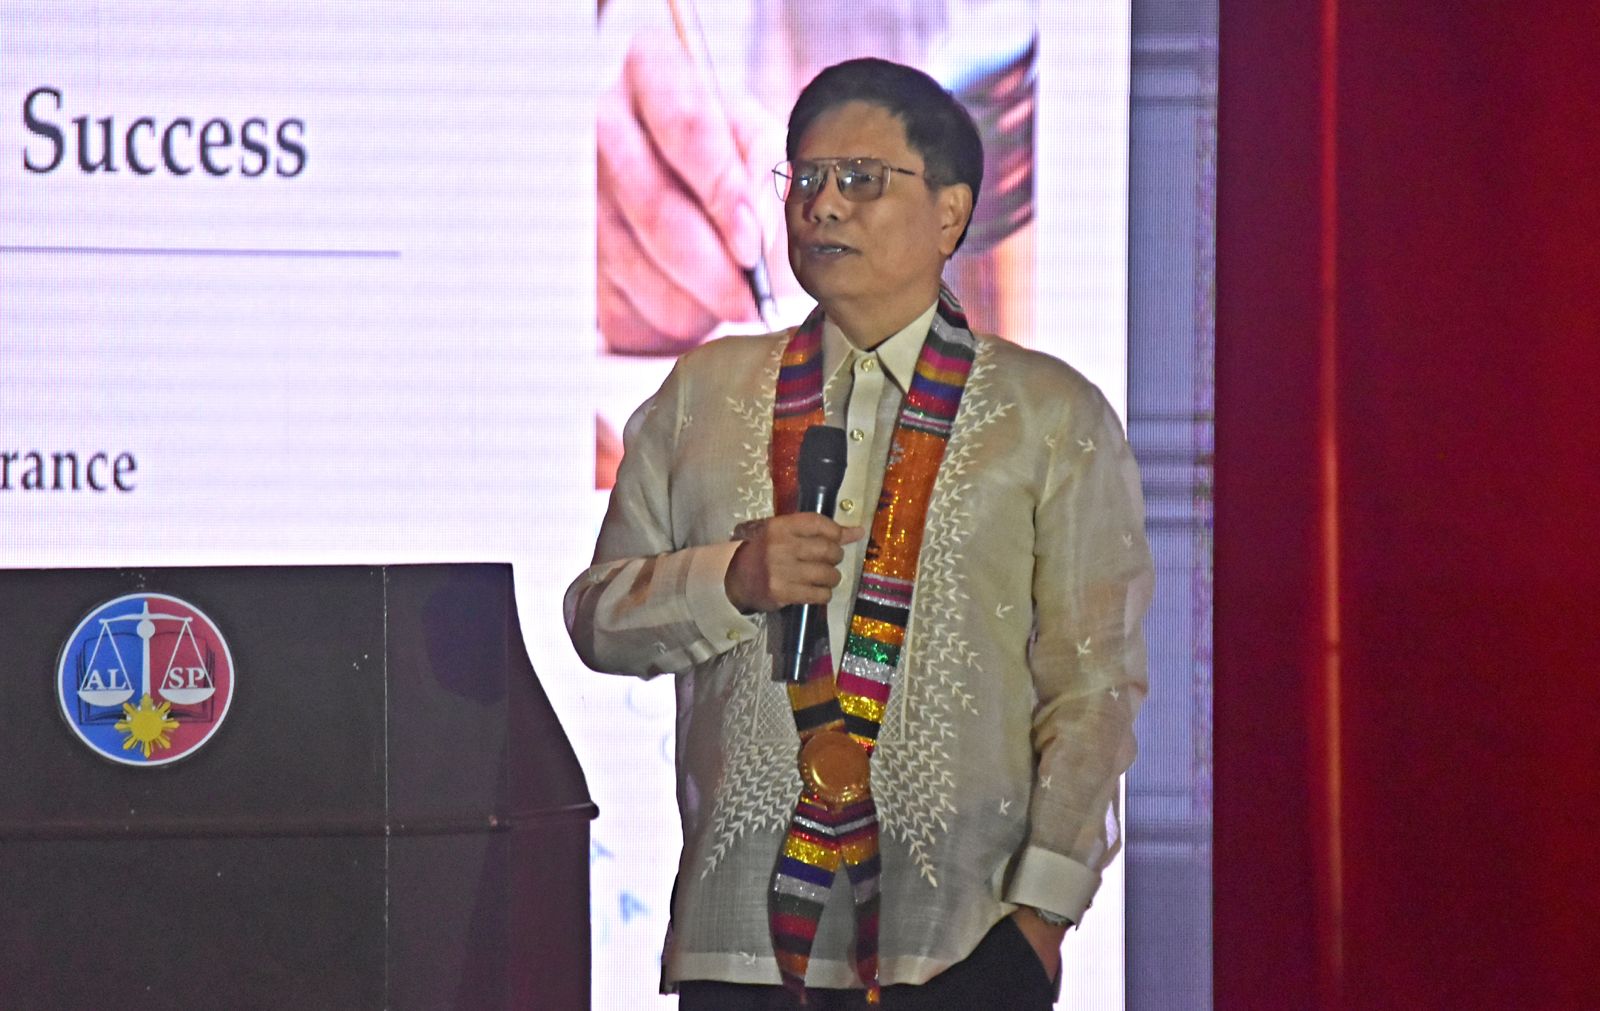 Supreme Court Associate Justice Mario Lopez stressed the need for legal education to evolve beyond mere memorization of legal doctrines toward a deeper understanding of the laws' intricacies and nuances.